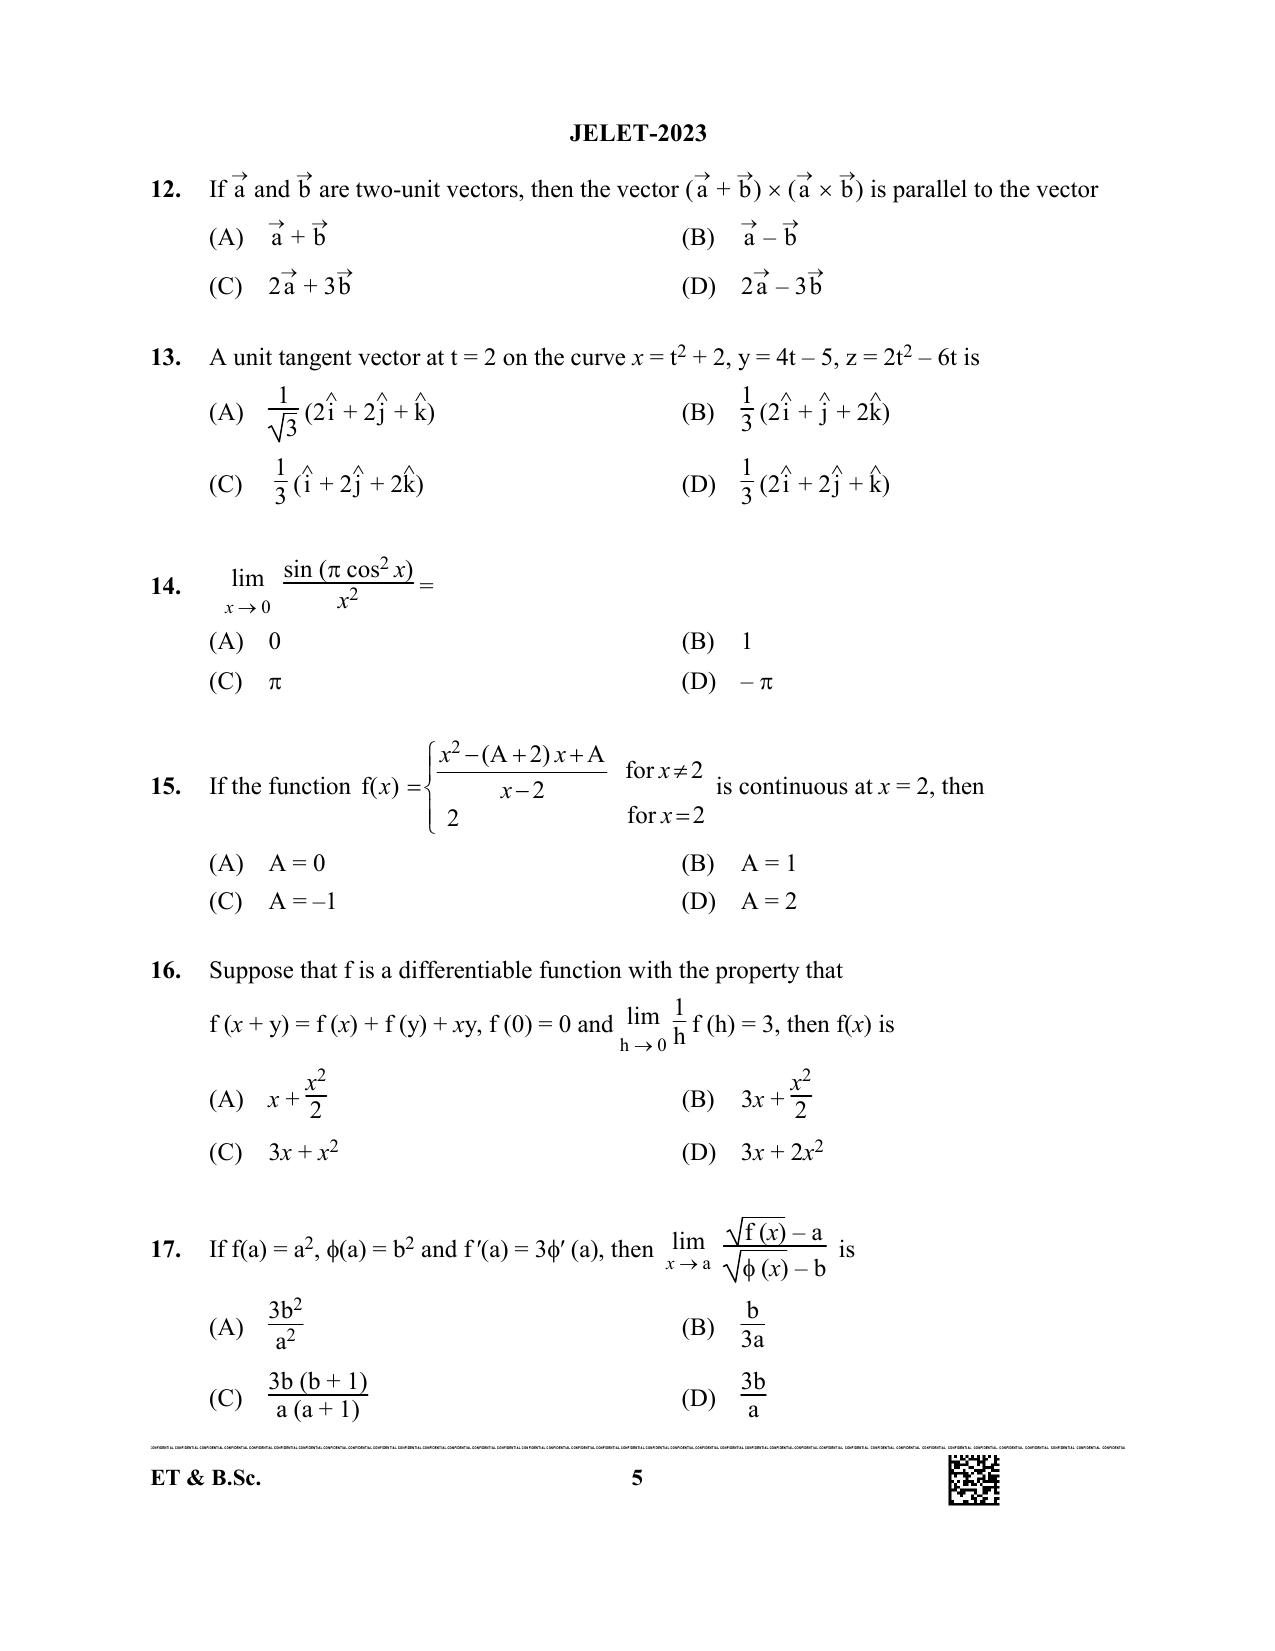 WBJEE JELET 2023 Paper I (ET & BSC) Question Papers - Page 5